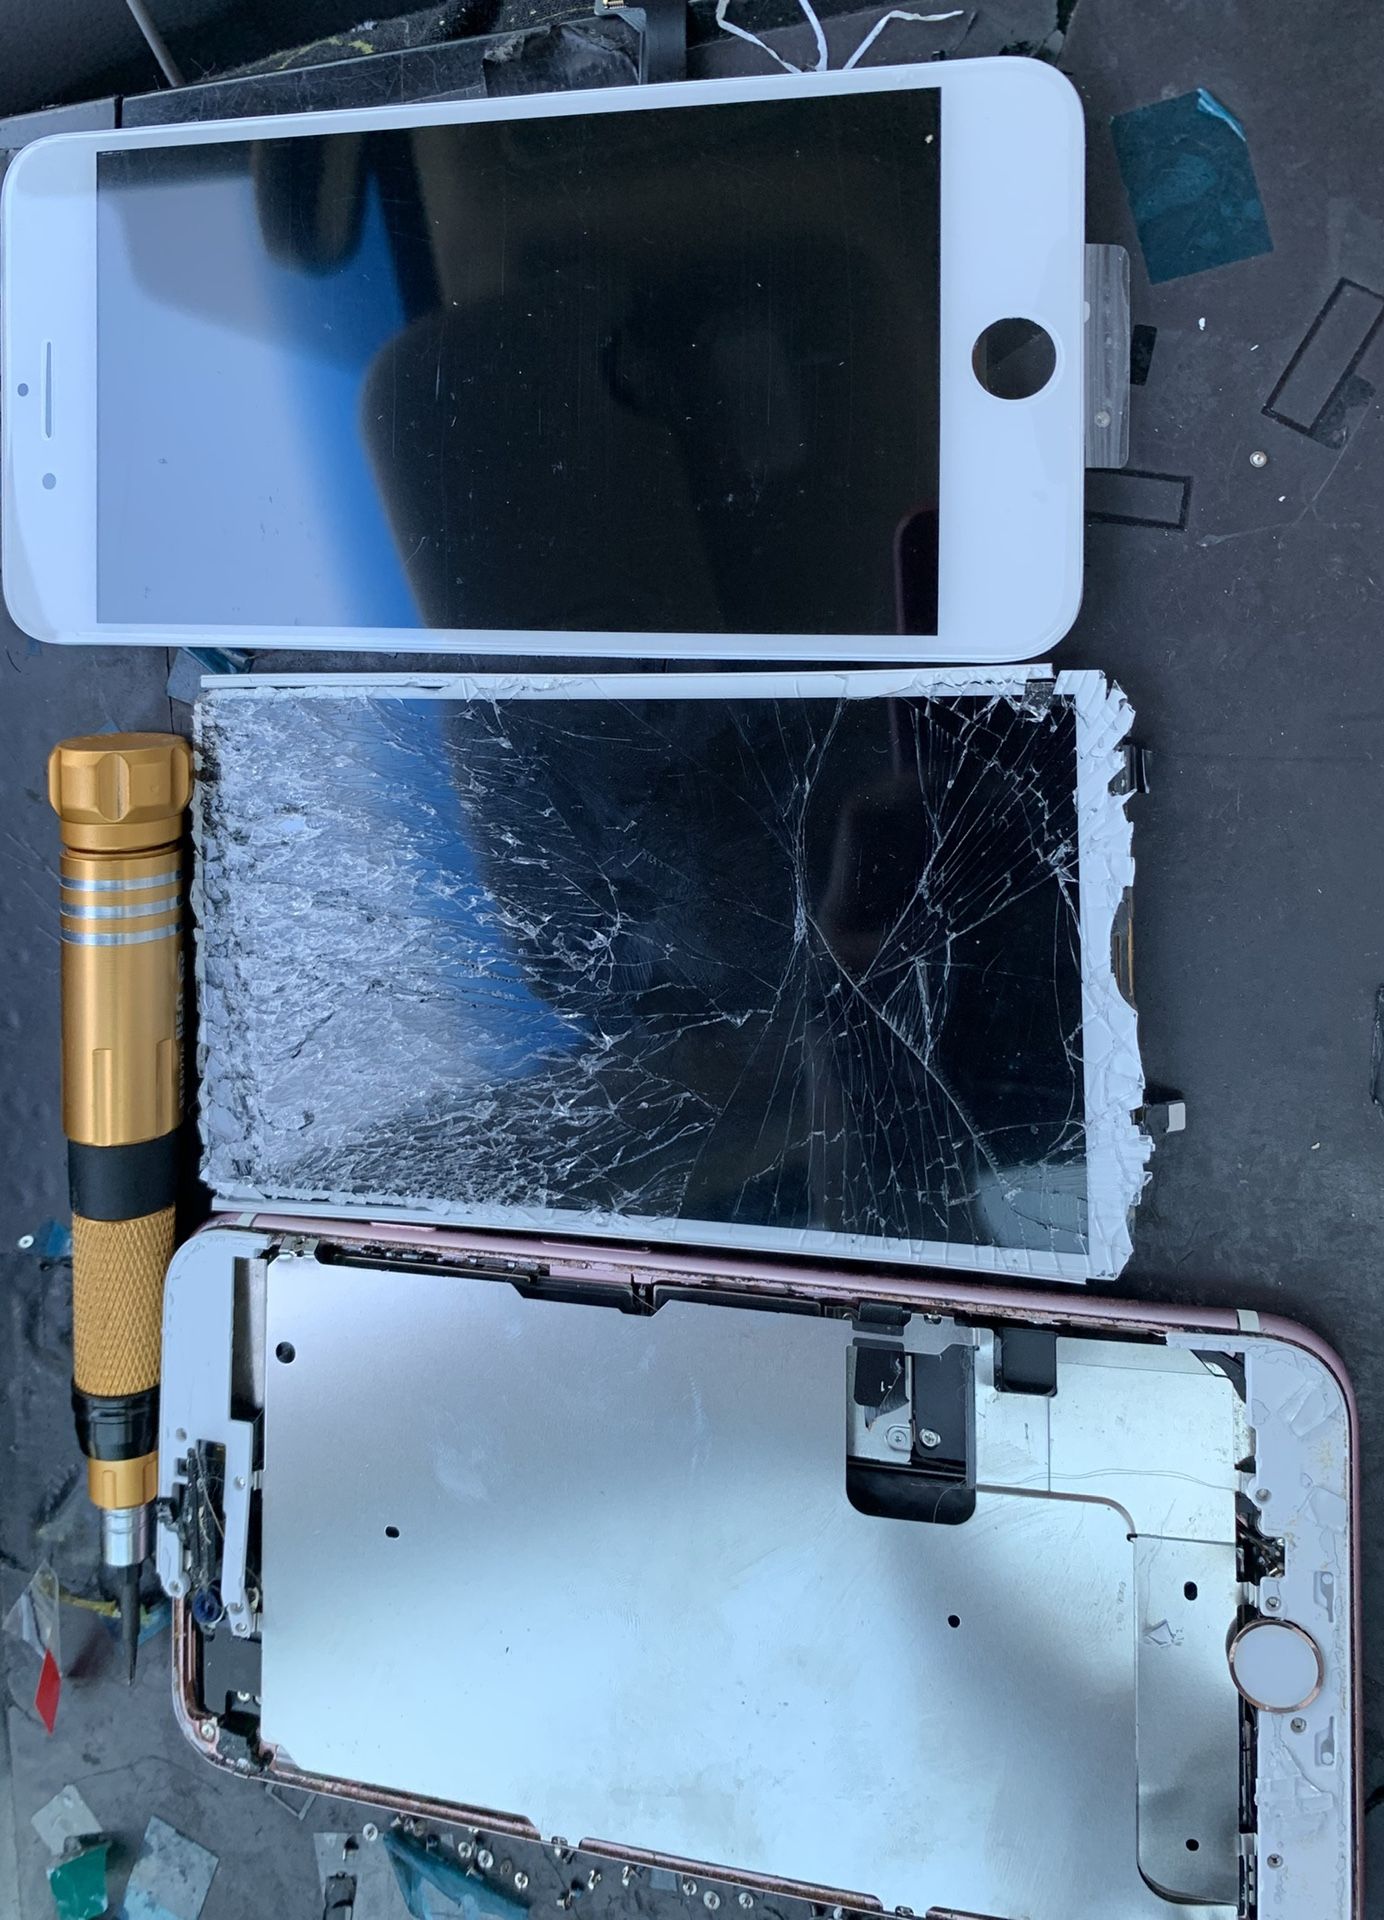 iPhone 7 Plus screen replacement <!!> We drive to you and fix +!-